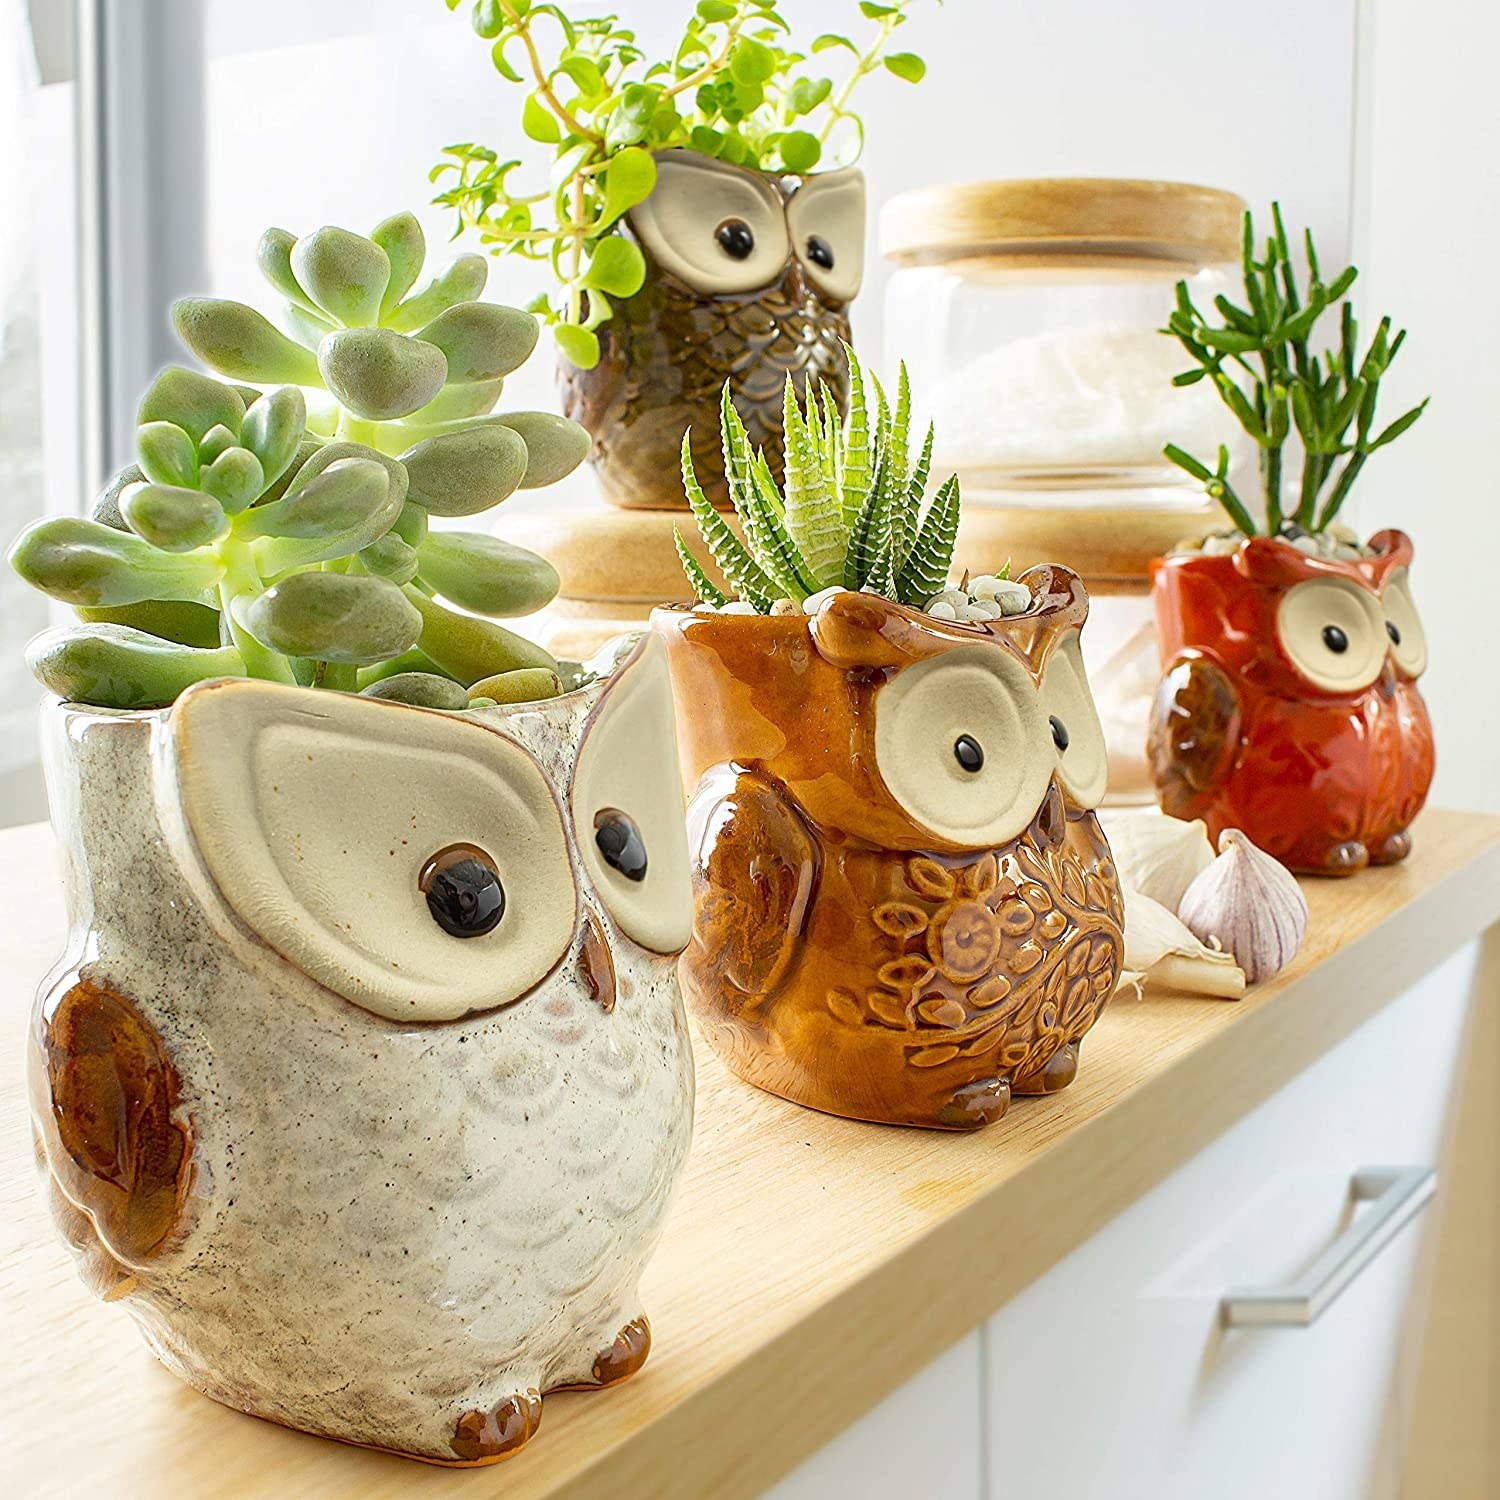 mini planters shaped like owls in different colors holding different types of succulents